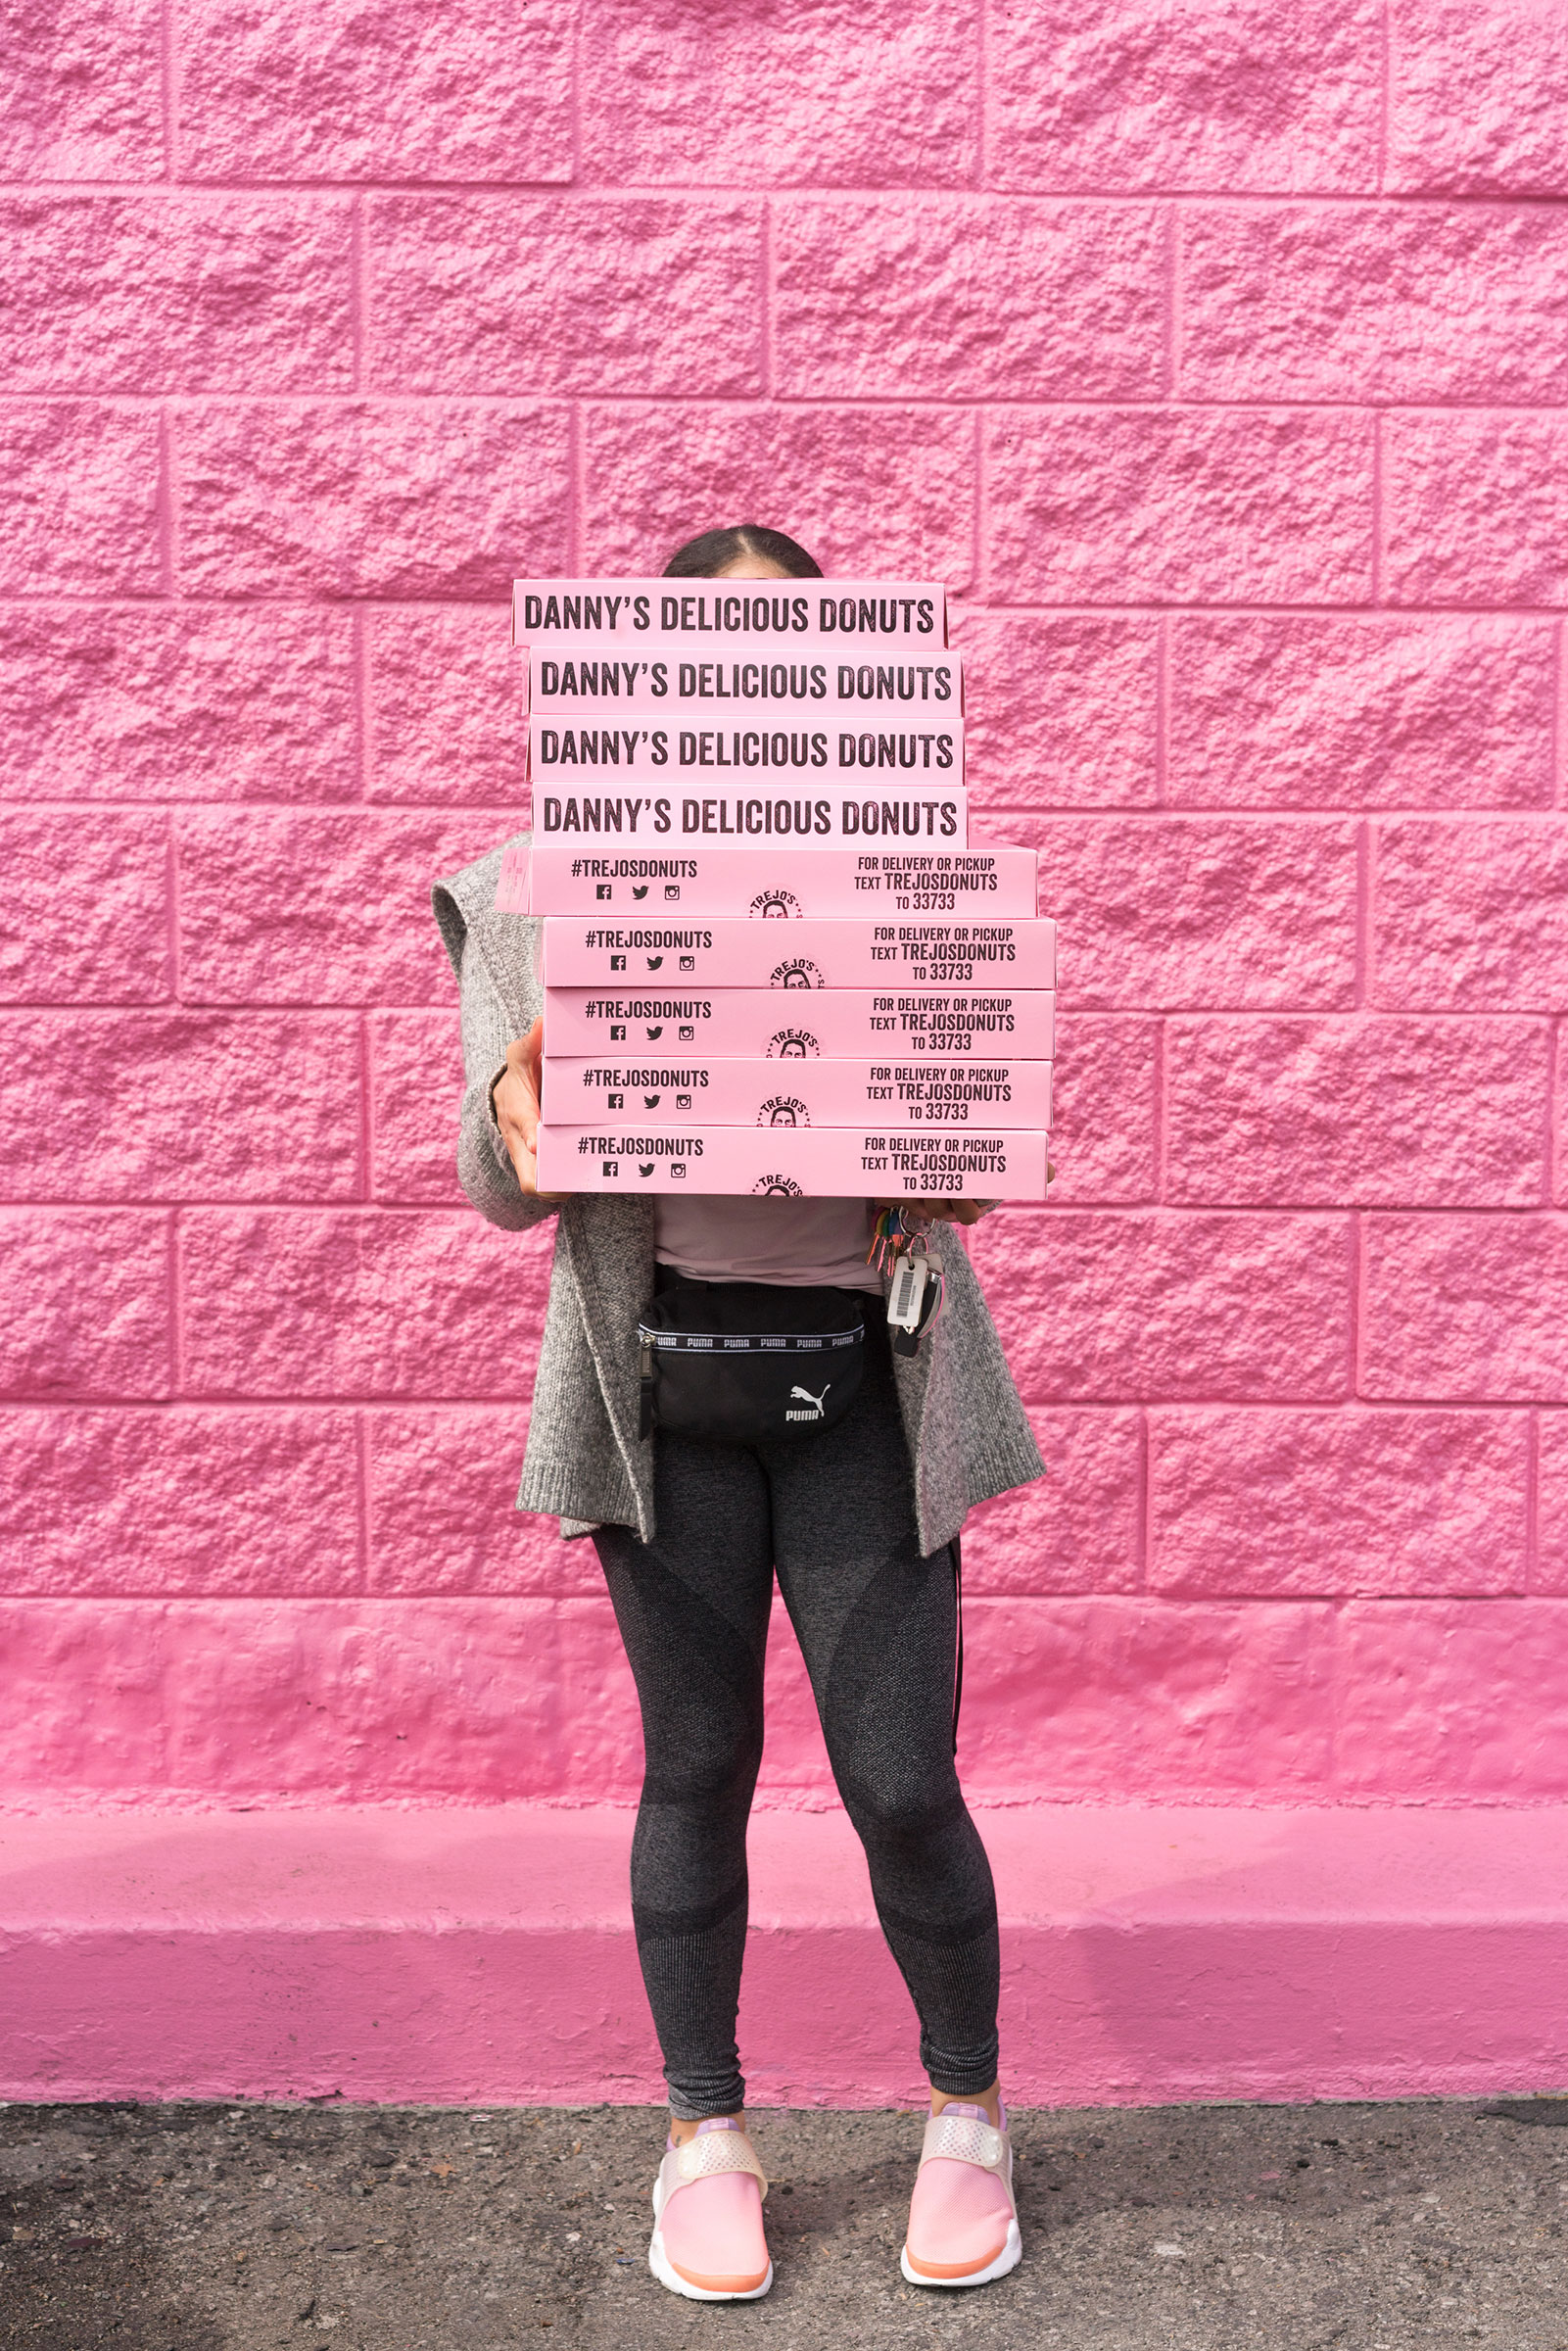 This woman, who did not want her face shown, purchase nine boxes of donuts as part of a post-Oscars PR campaign. Trejo's Donuts